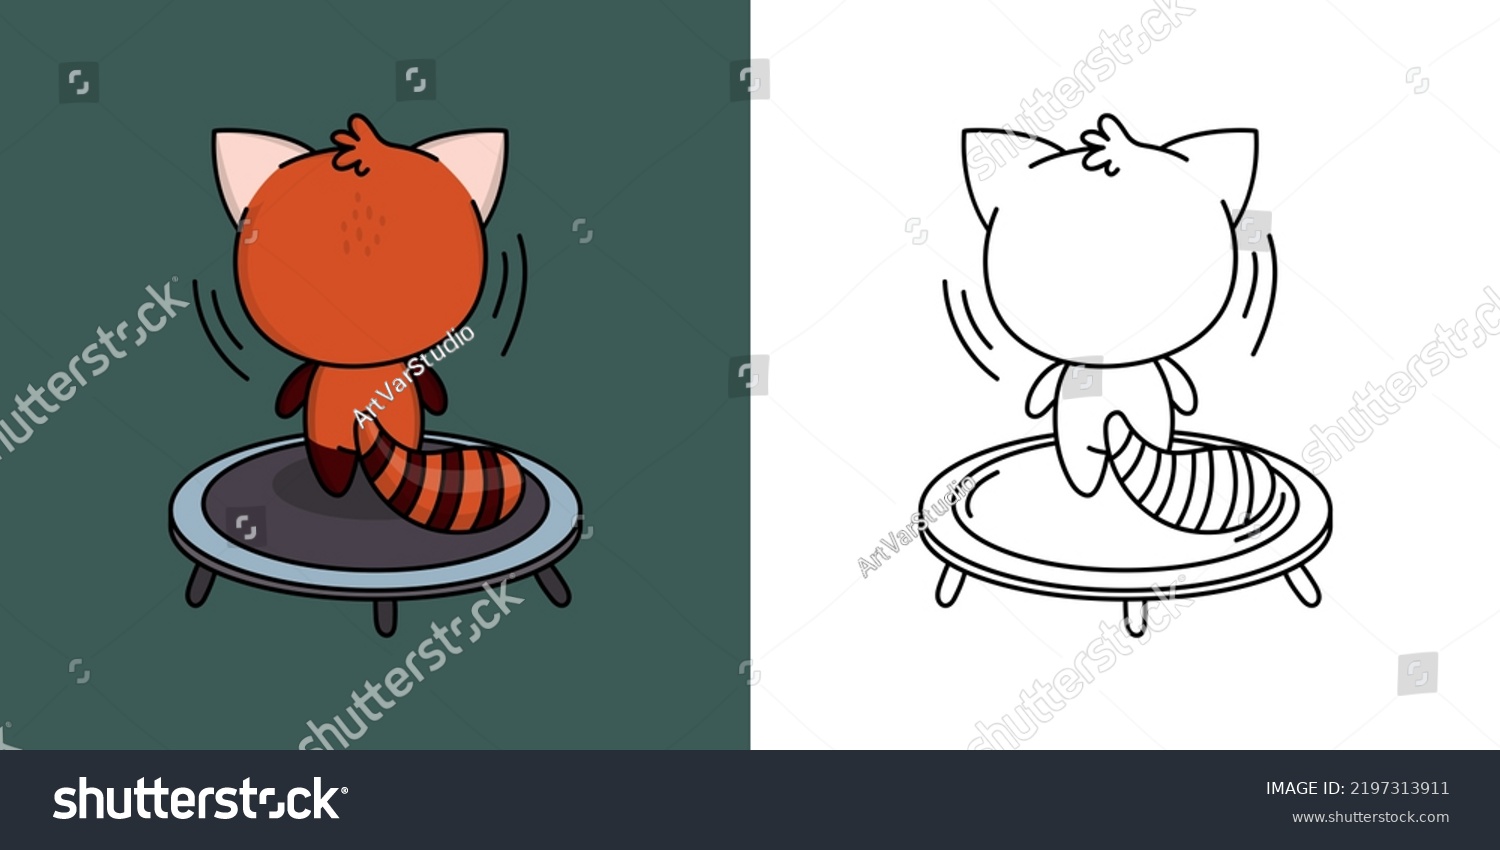 SVG of Set Clipart Red Panda Sportsman Multicolored and Black and White. Kawaii Animal Sportsman. Vector Illustration of a Kawaii Animal for Prints for Clothes, Stickers, Baby Shower, Coloring Pages.
 svg